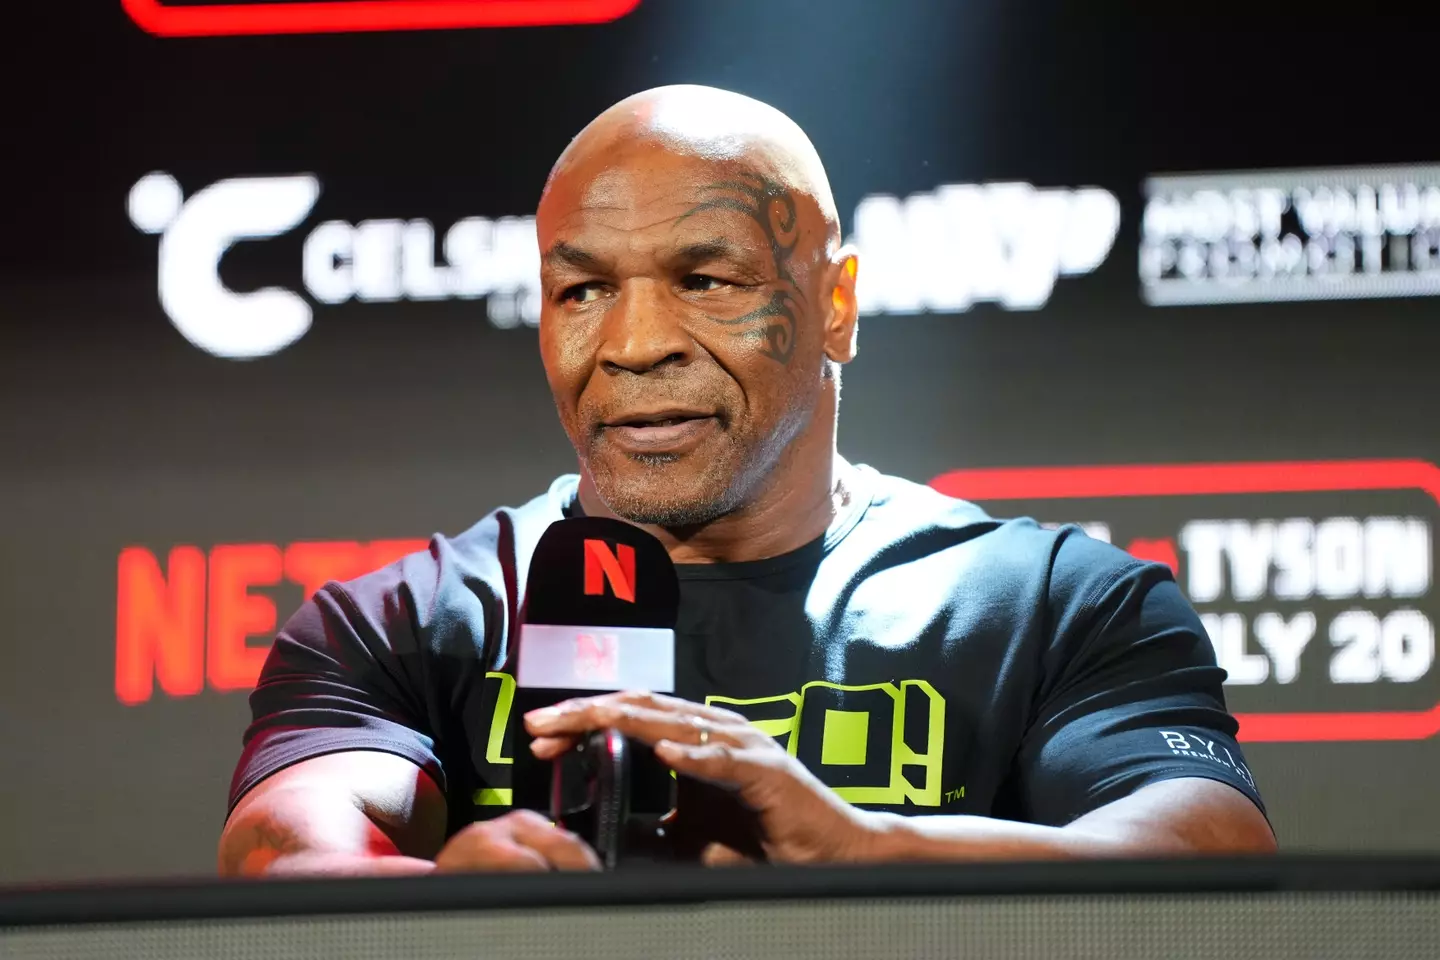 The fight has been postponed after Tyson had a health flare up. (Cooper Neill/Getty Images for Netflix)